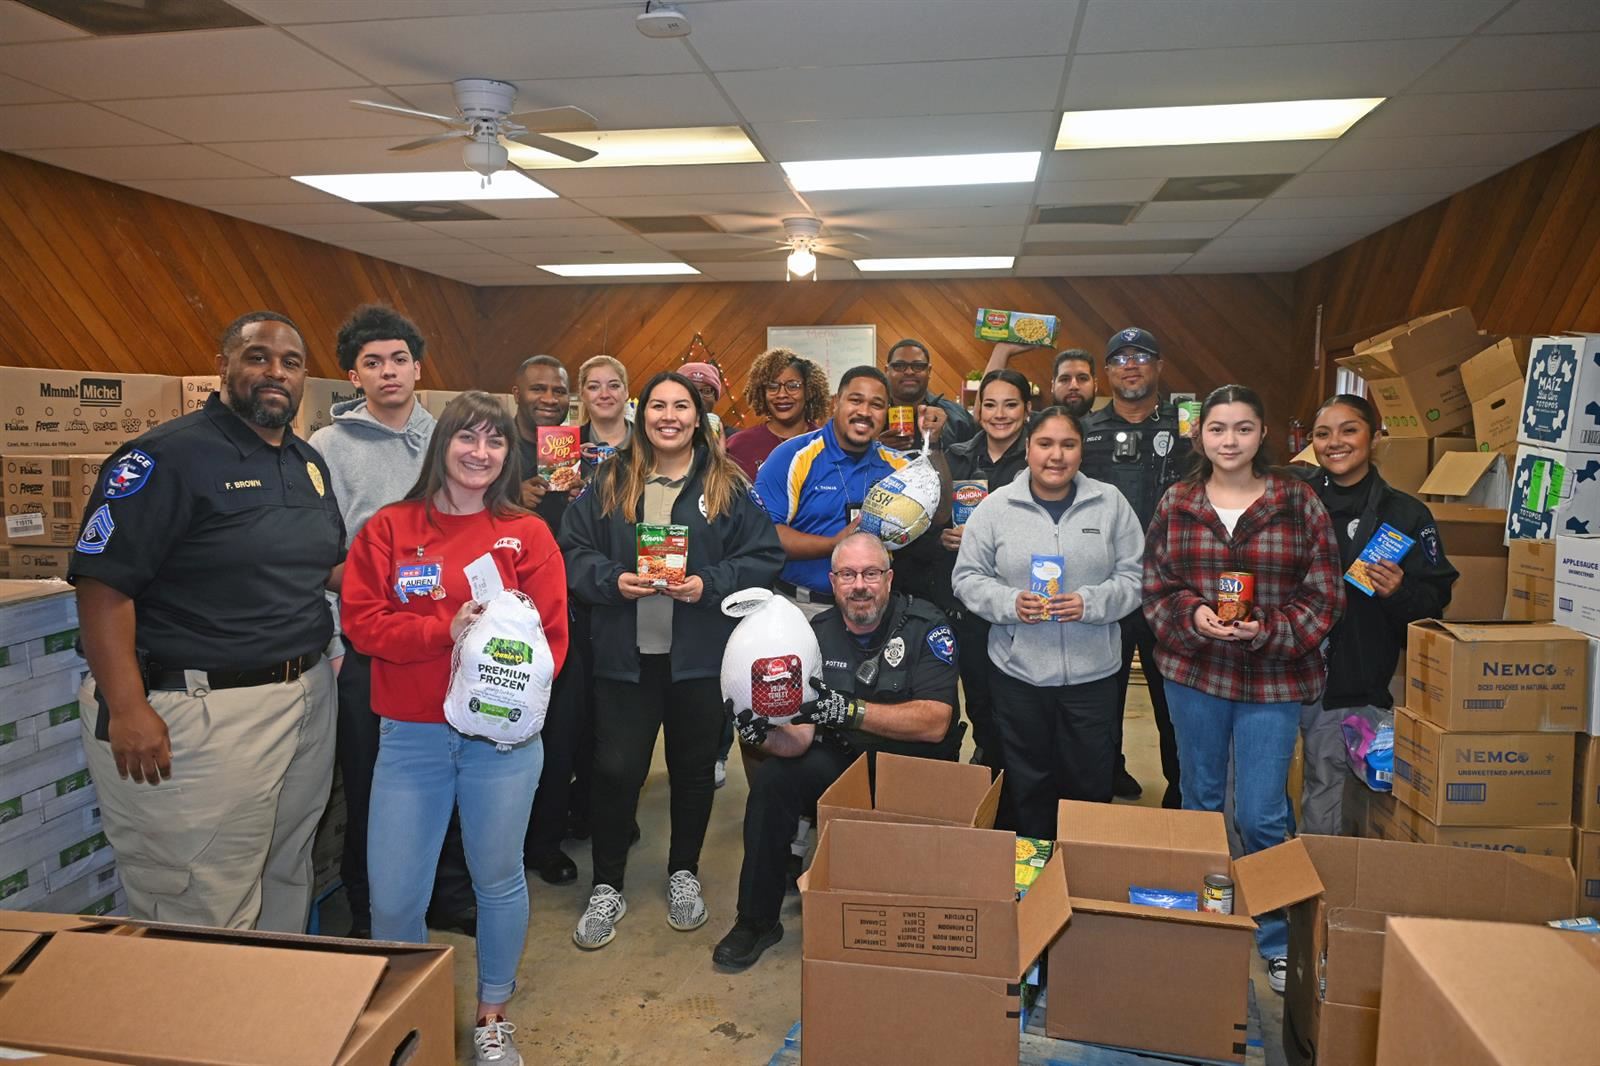 The CFISD Police Department joined representatives from H-E-B and Cy-Hope to help put together and deliver 50 meals.